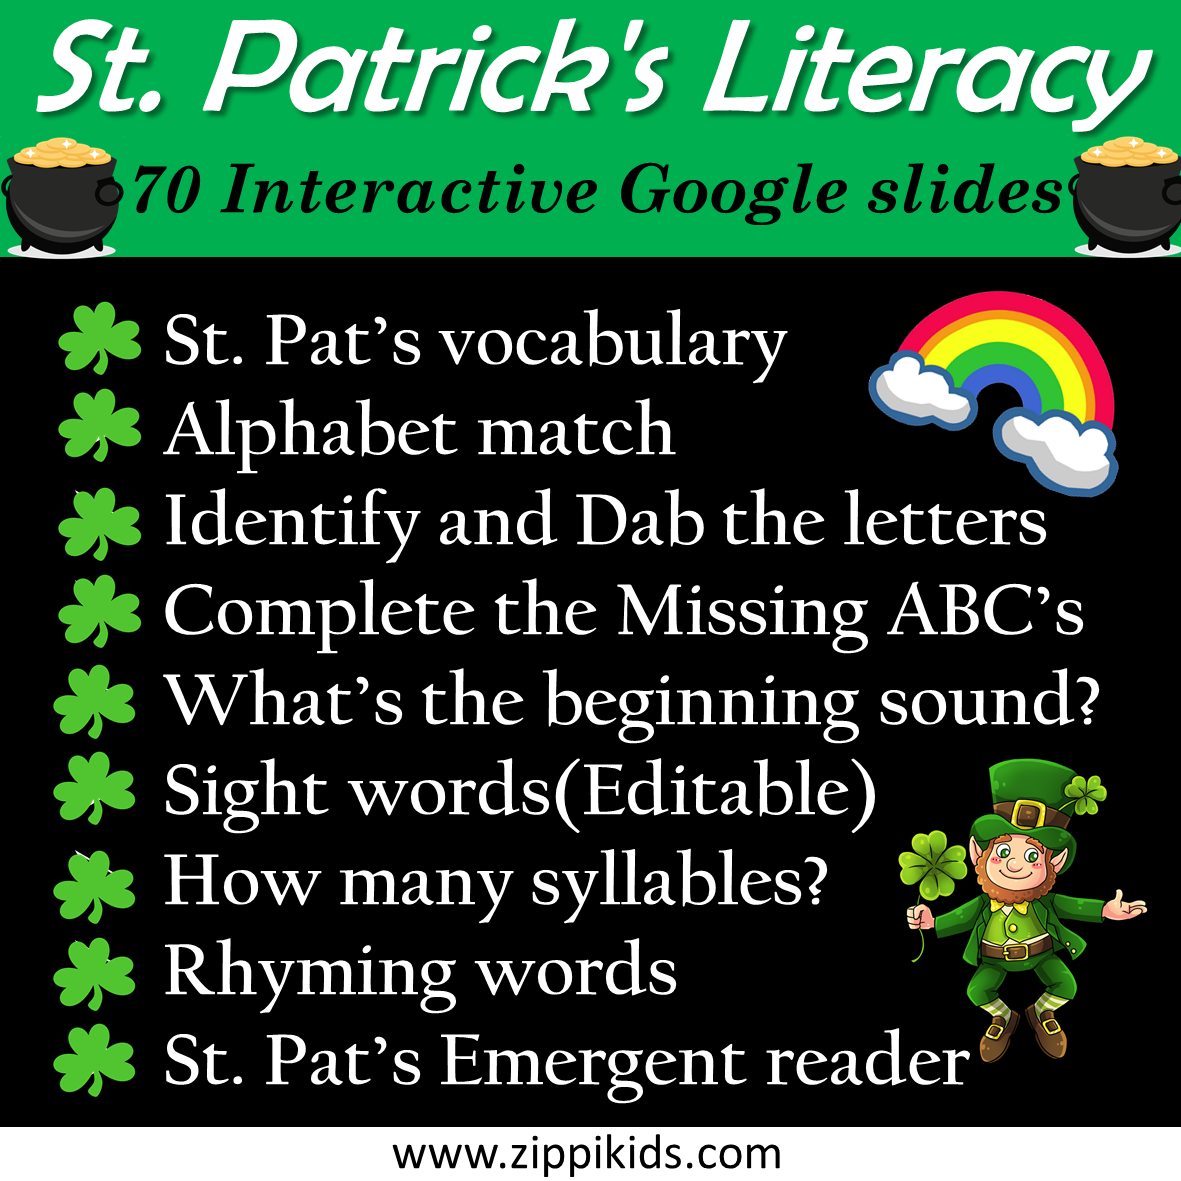 St Patrick's Day Literacy pack - 70 Google slides | Distance learning | Virtual